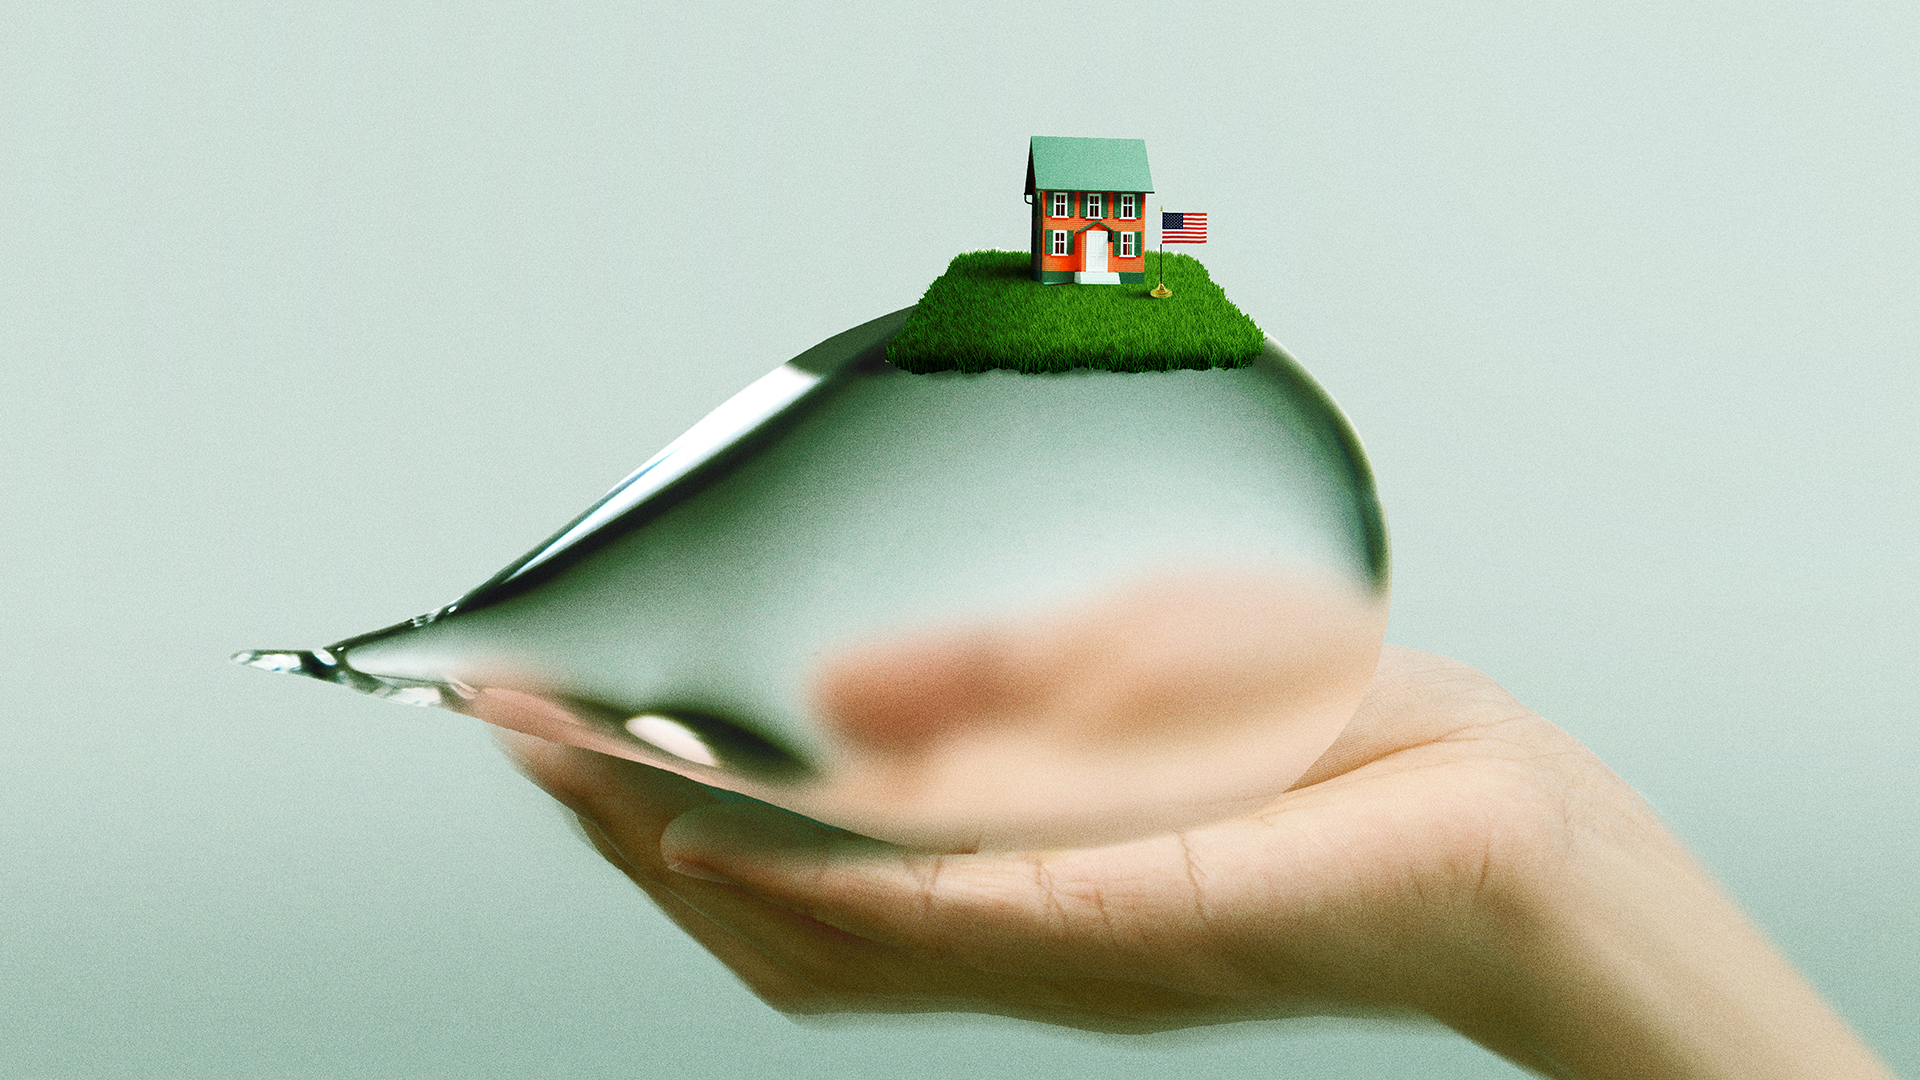 Hand holds a giant water droplet with a typical American house on top